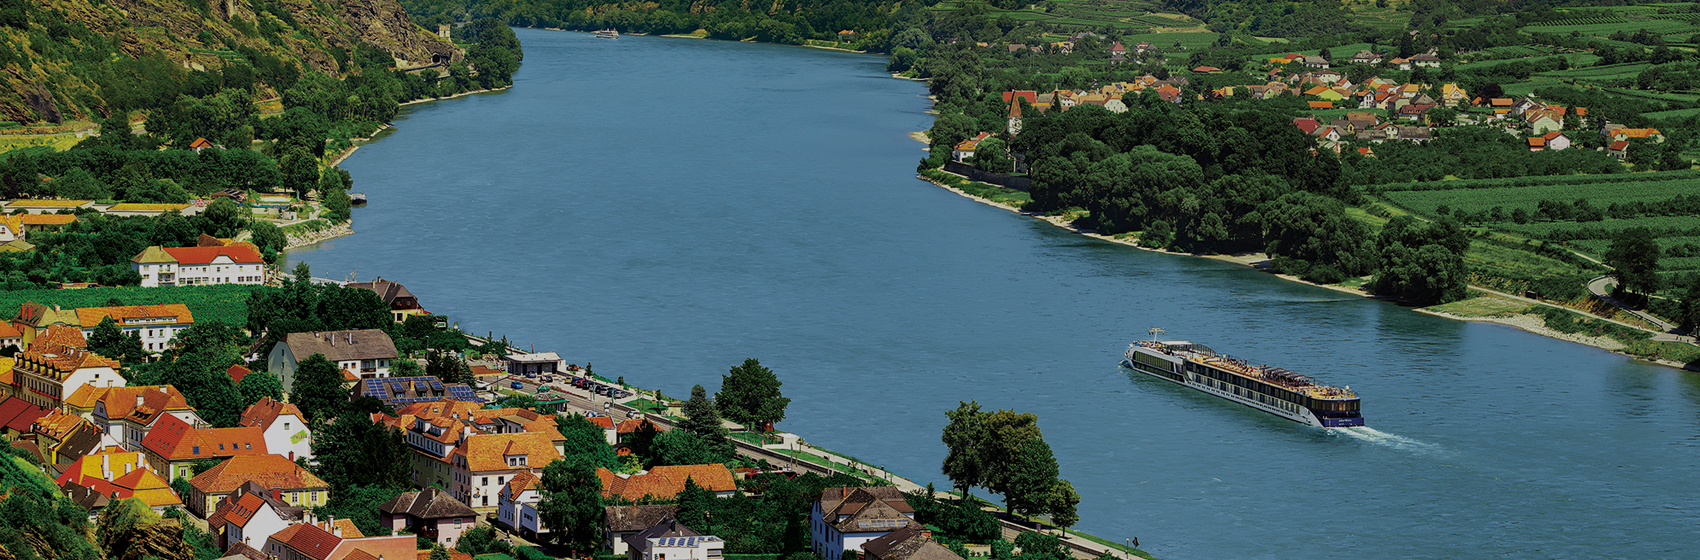 An overhead view of an AmaWaterways River Cruise